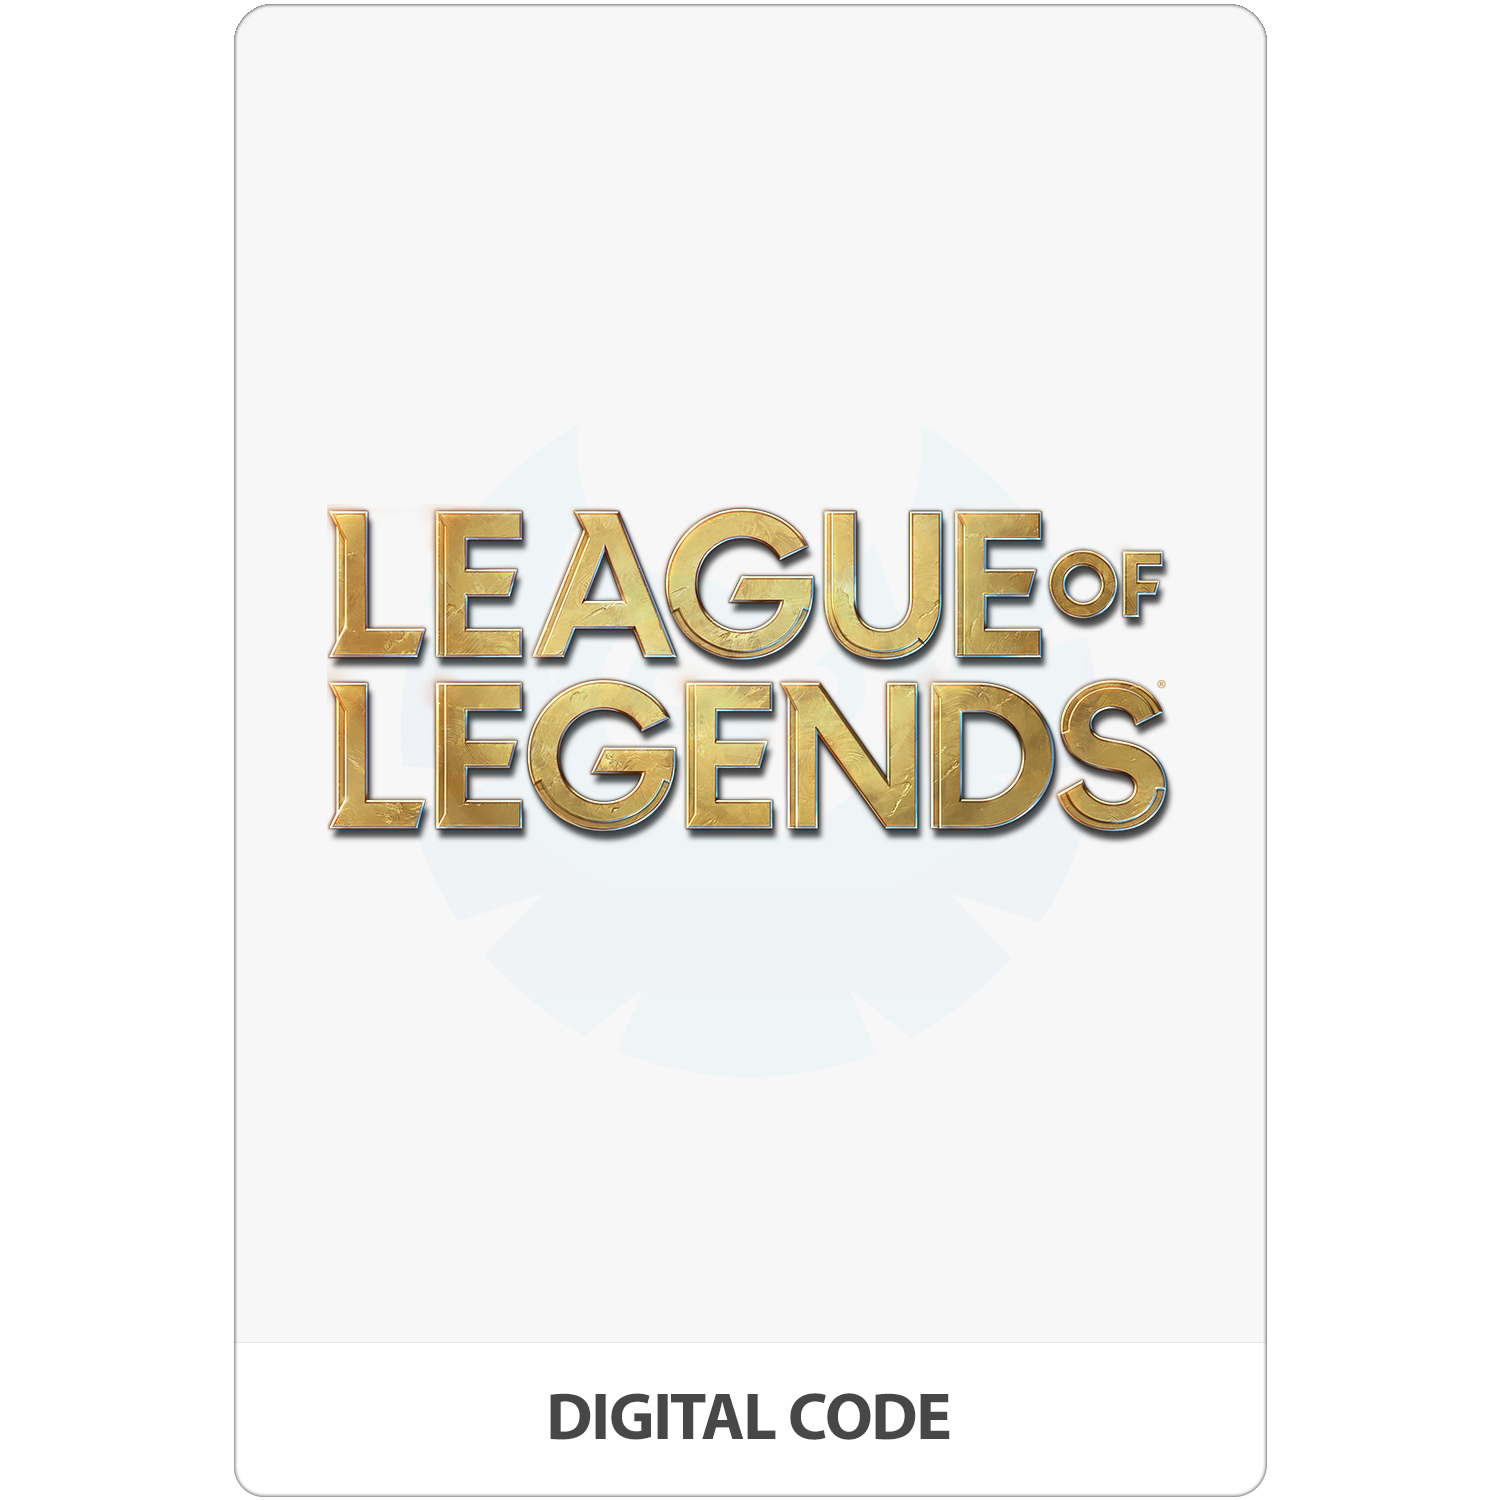 League Gift Riot of Cash 250 TURGAME TL - TURKEY Points | Riot Buy Instant - Delivery Card | Legends - a